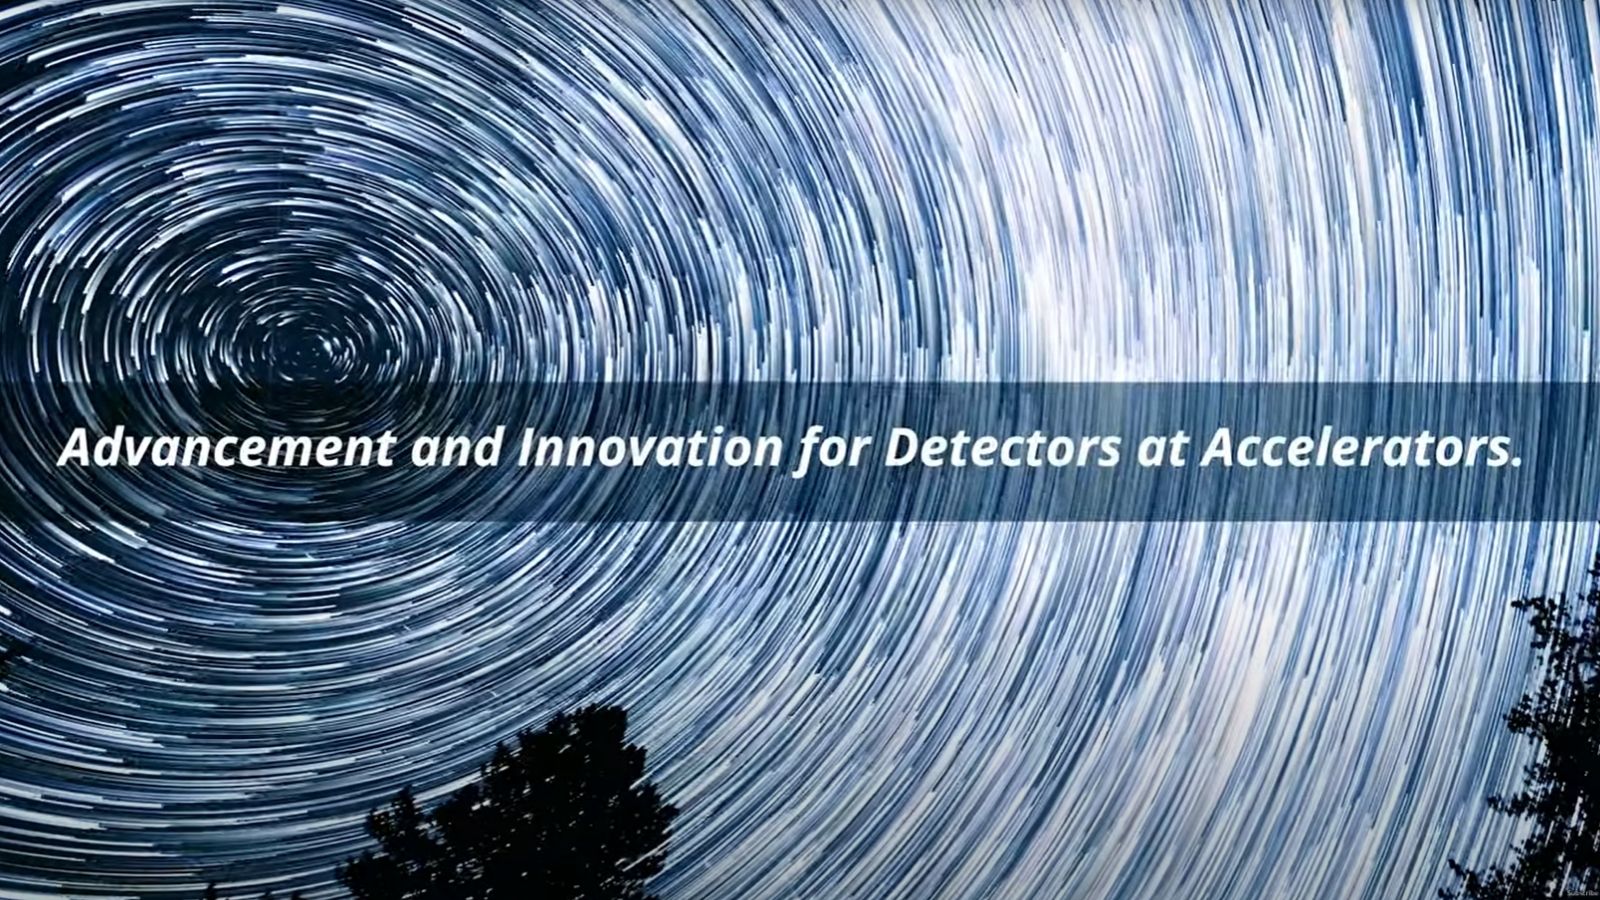 New detector technologies for particle accelerators